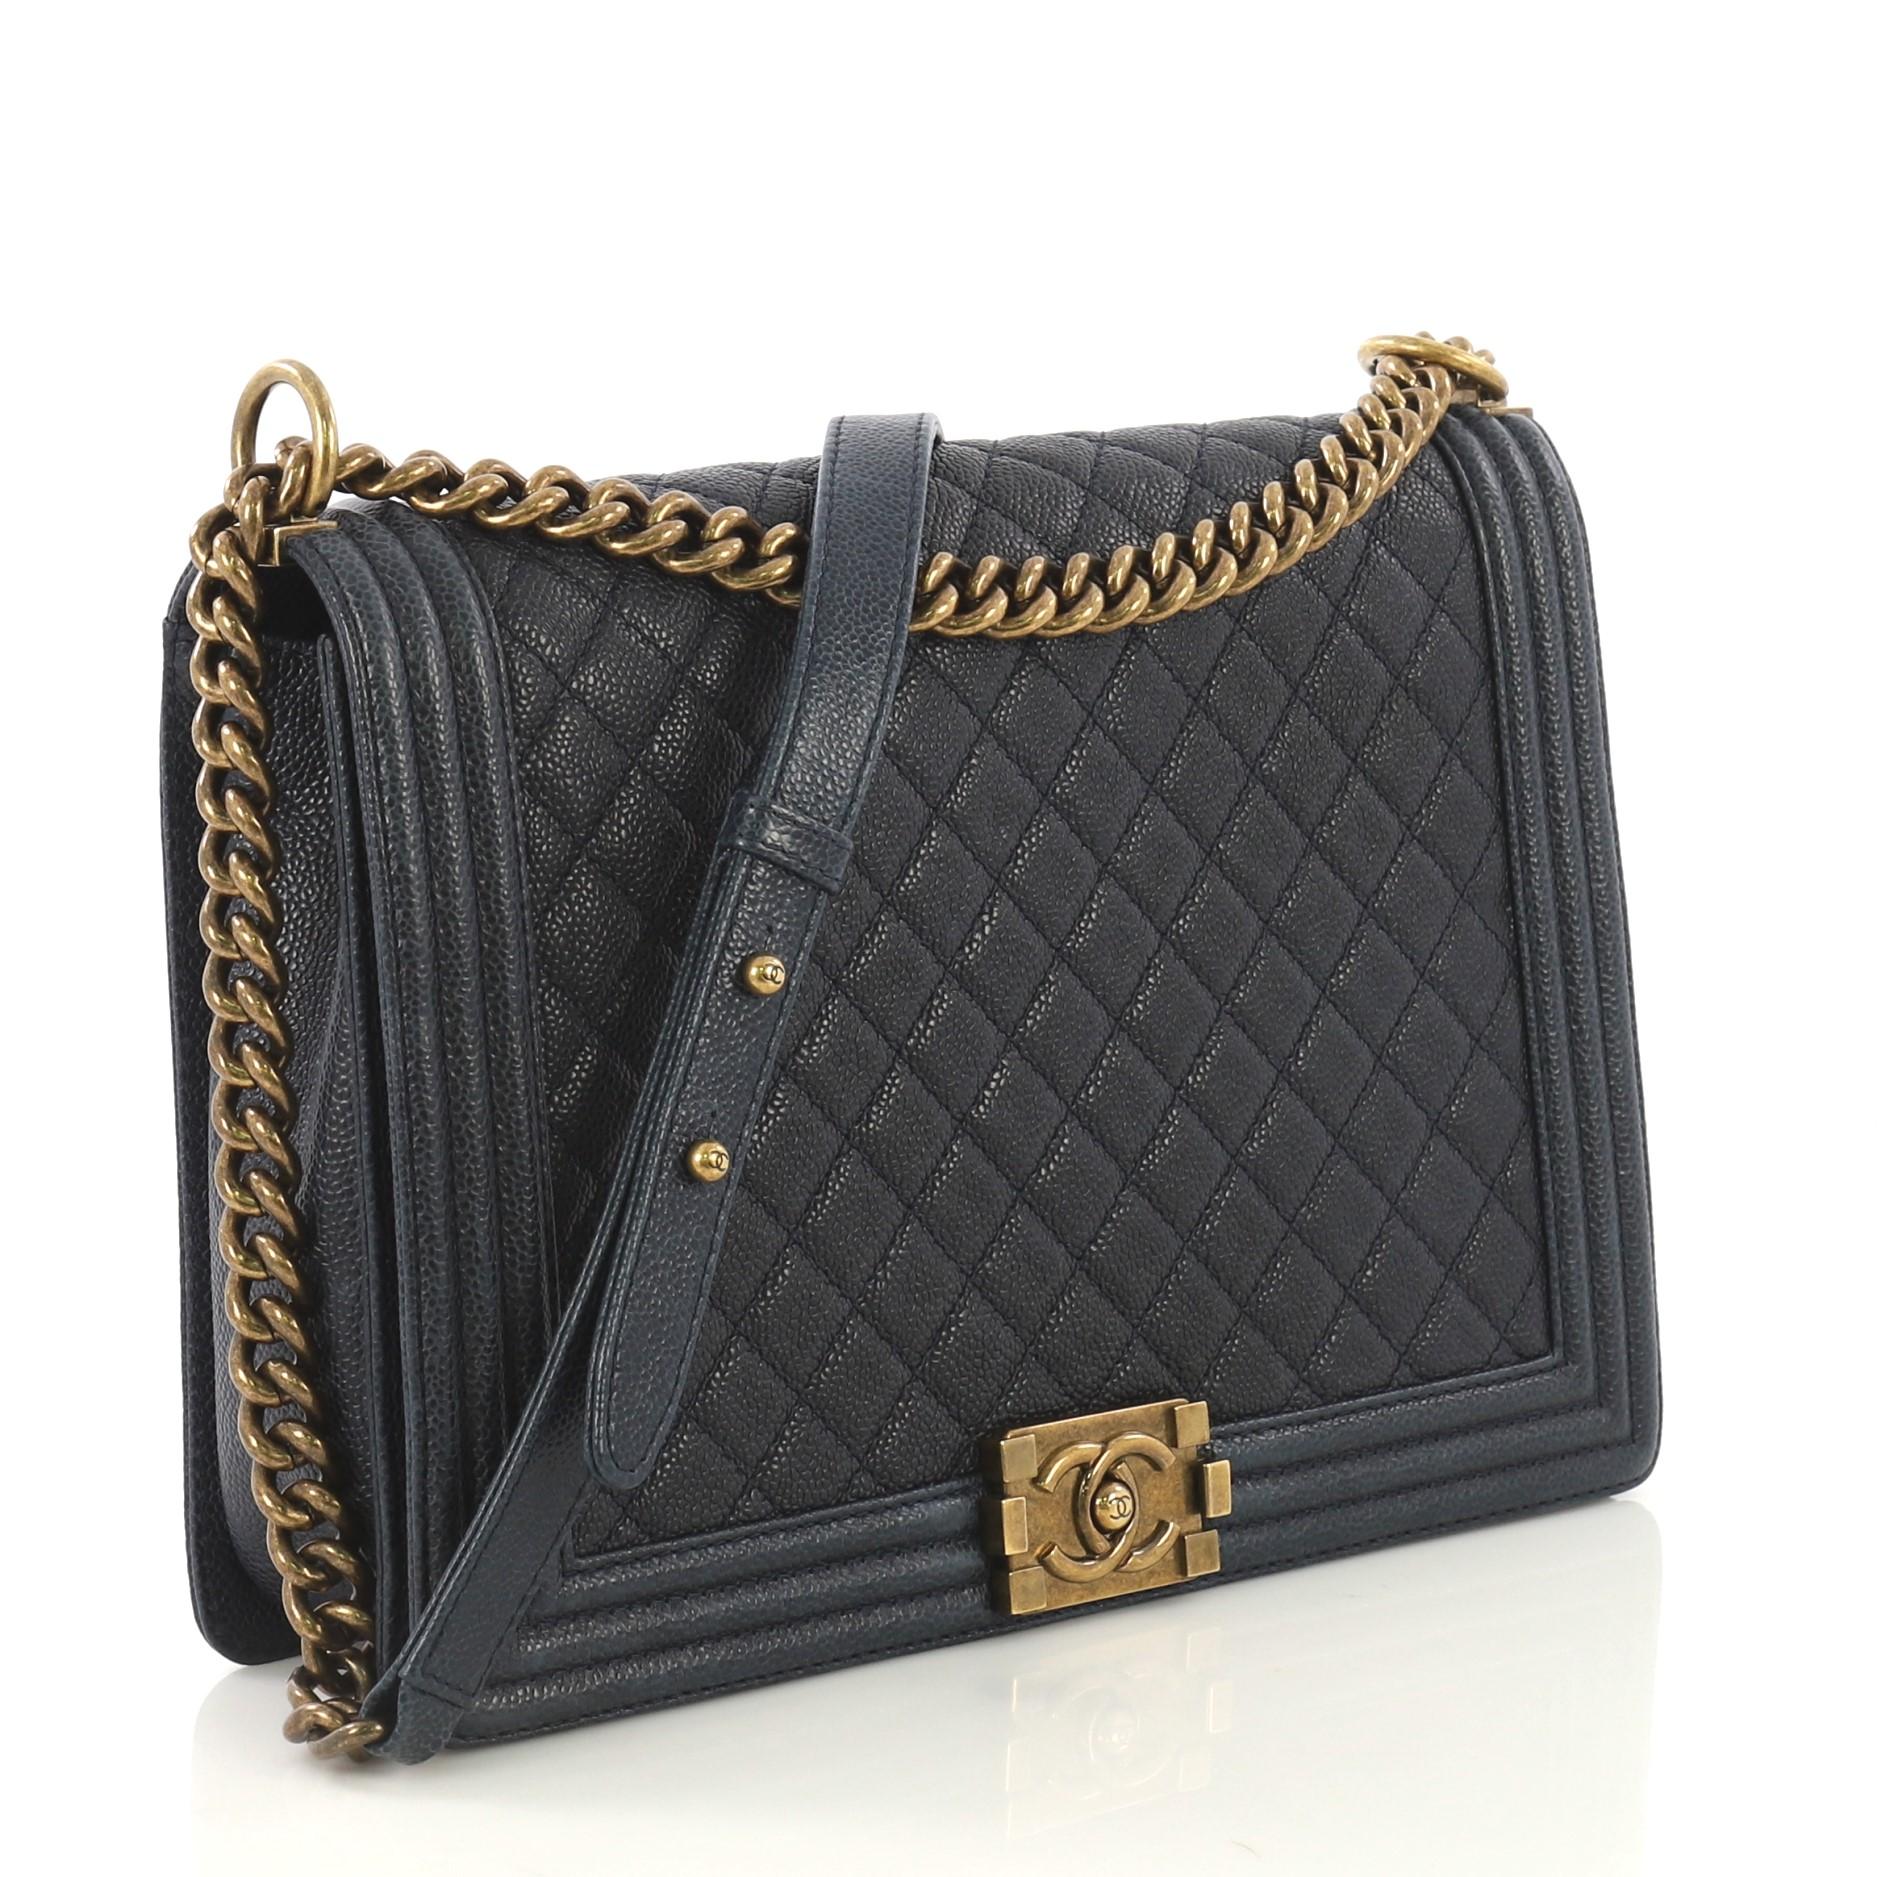 This Chanel Boy Flap Bag Quilted Caviar Large, crafted from navy quilted caviar leather, features chain link strap with leather shoulder pad and aged gold-tone hardware. Its CC boy logo push-lock closure opens to a navy fabric interior with zip and